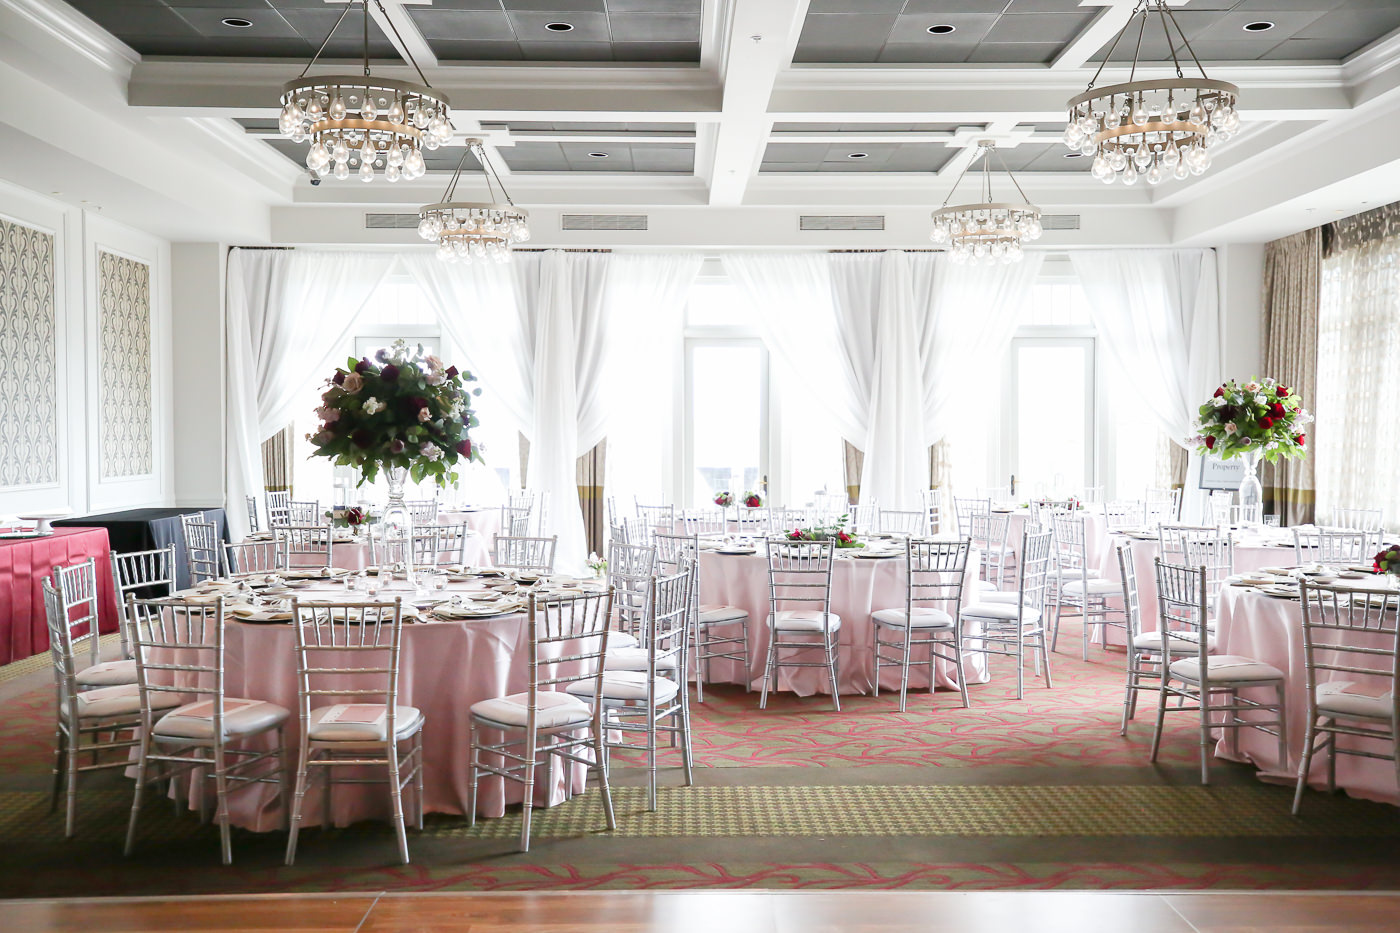 Ballroom Romantic Wedding Reception Decor, Round Tables with Blush Pink Linens, Silver Chiavari Chairs | Wedding Photographer Lifelong Photography Studios | Tampa Bay Wedding Planner Blue Skies Weddings and Events | St. Petersburg Hotel Wedding Venue The Birchwood | Over the Top Rental Linens